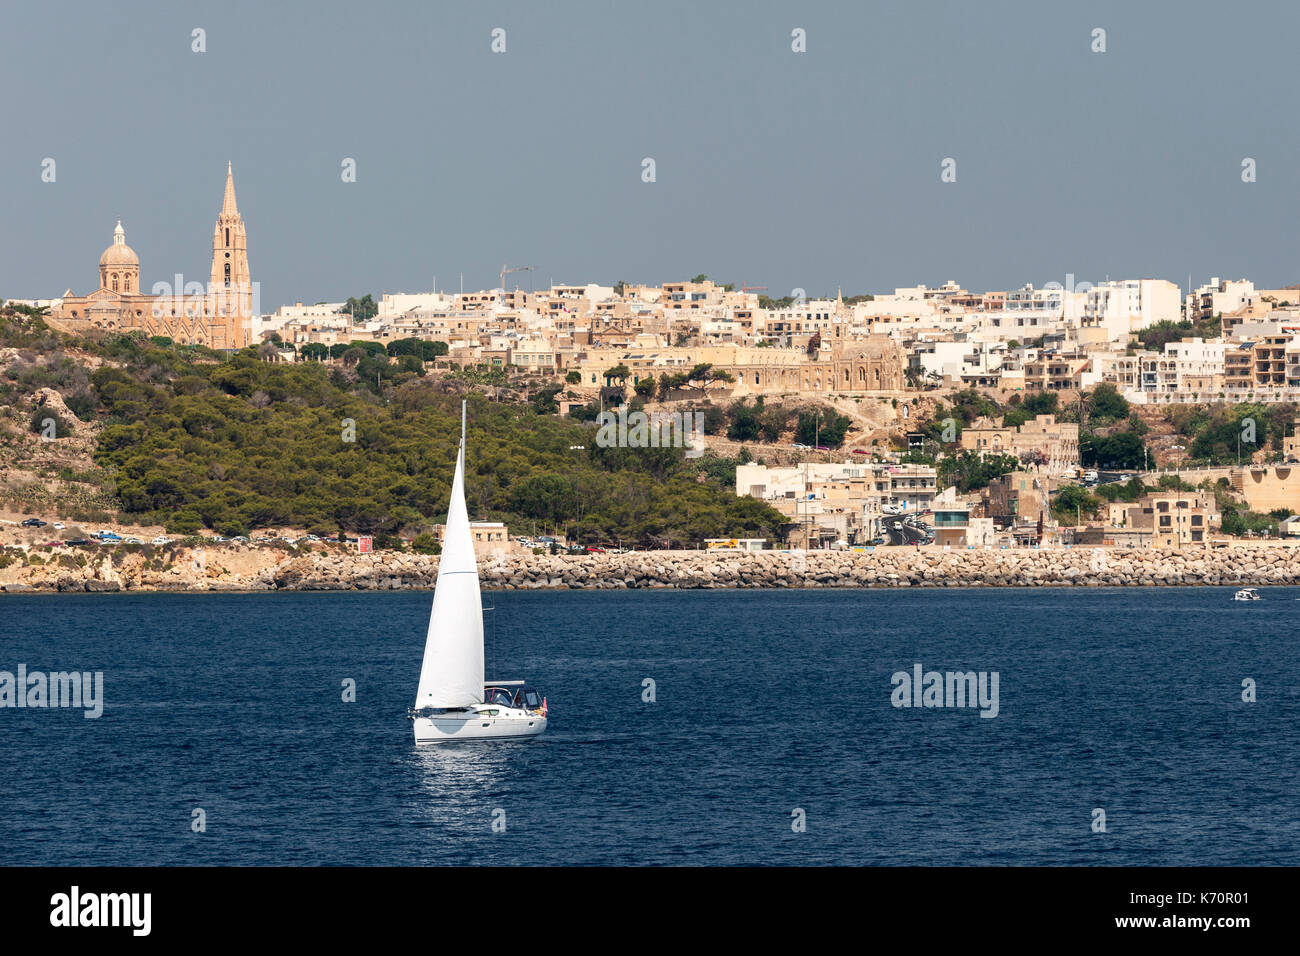 Sailoing boat and Mġarr town on the island of Gozo in Malta. Stock Photo